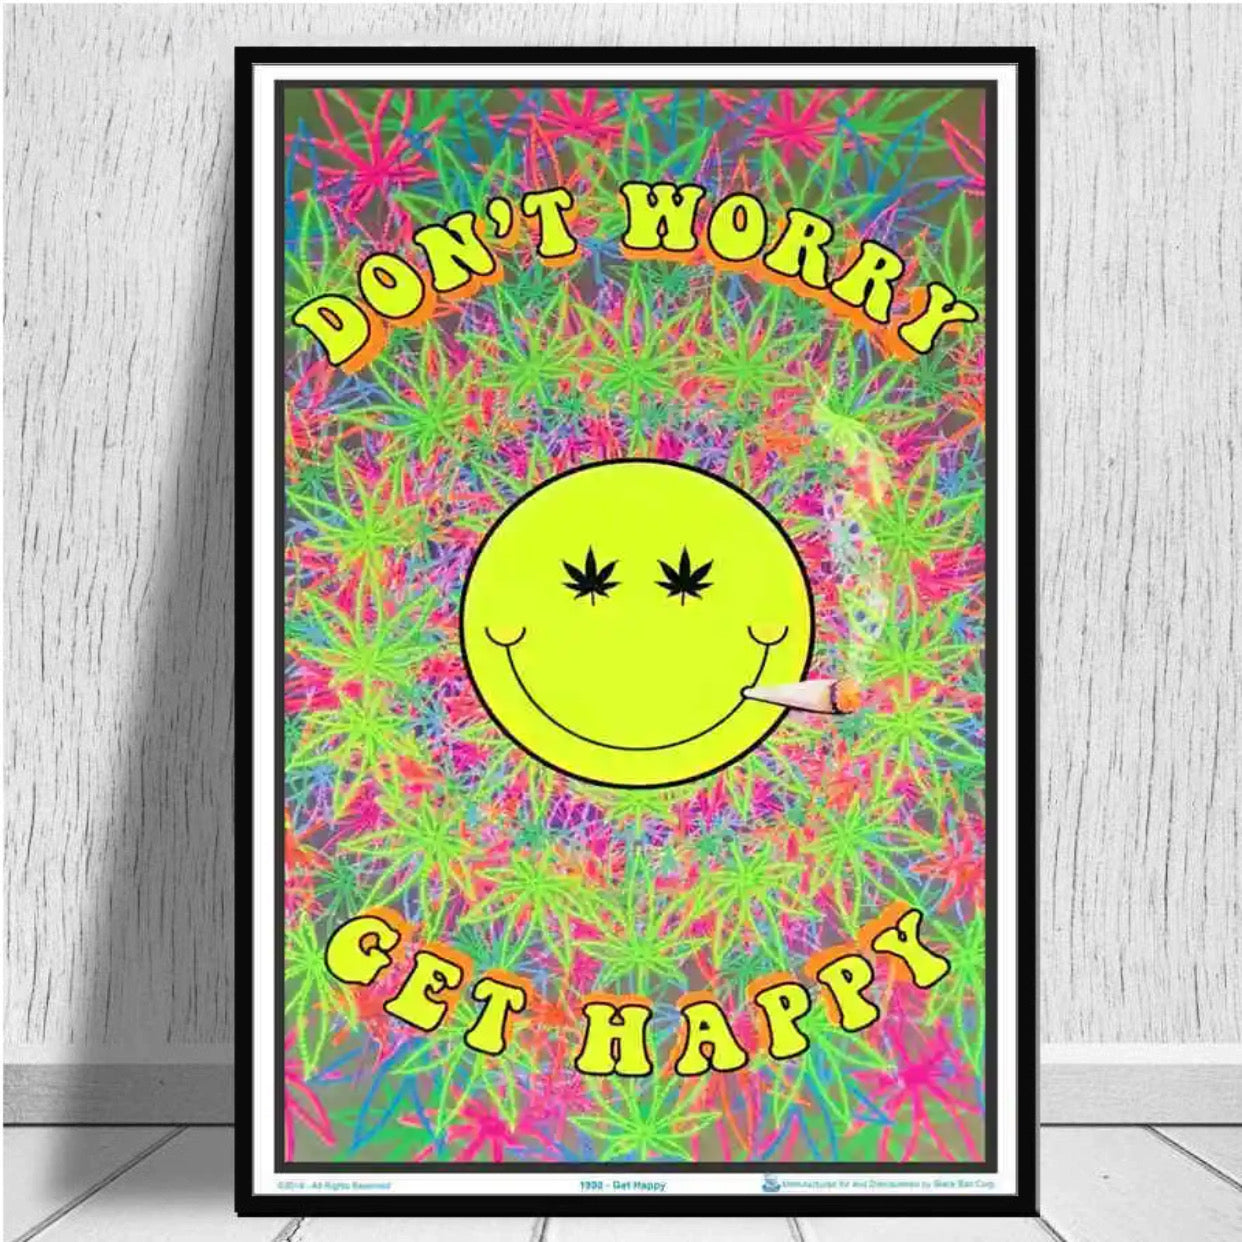 "don't worry get happy" poster